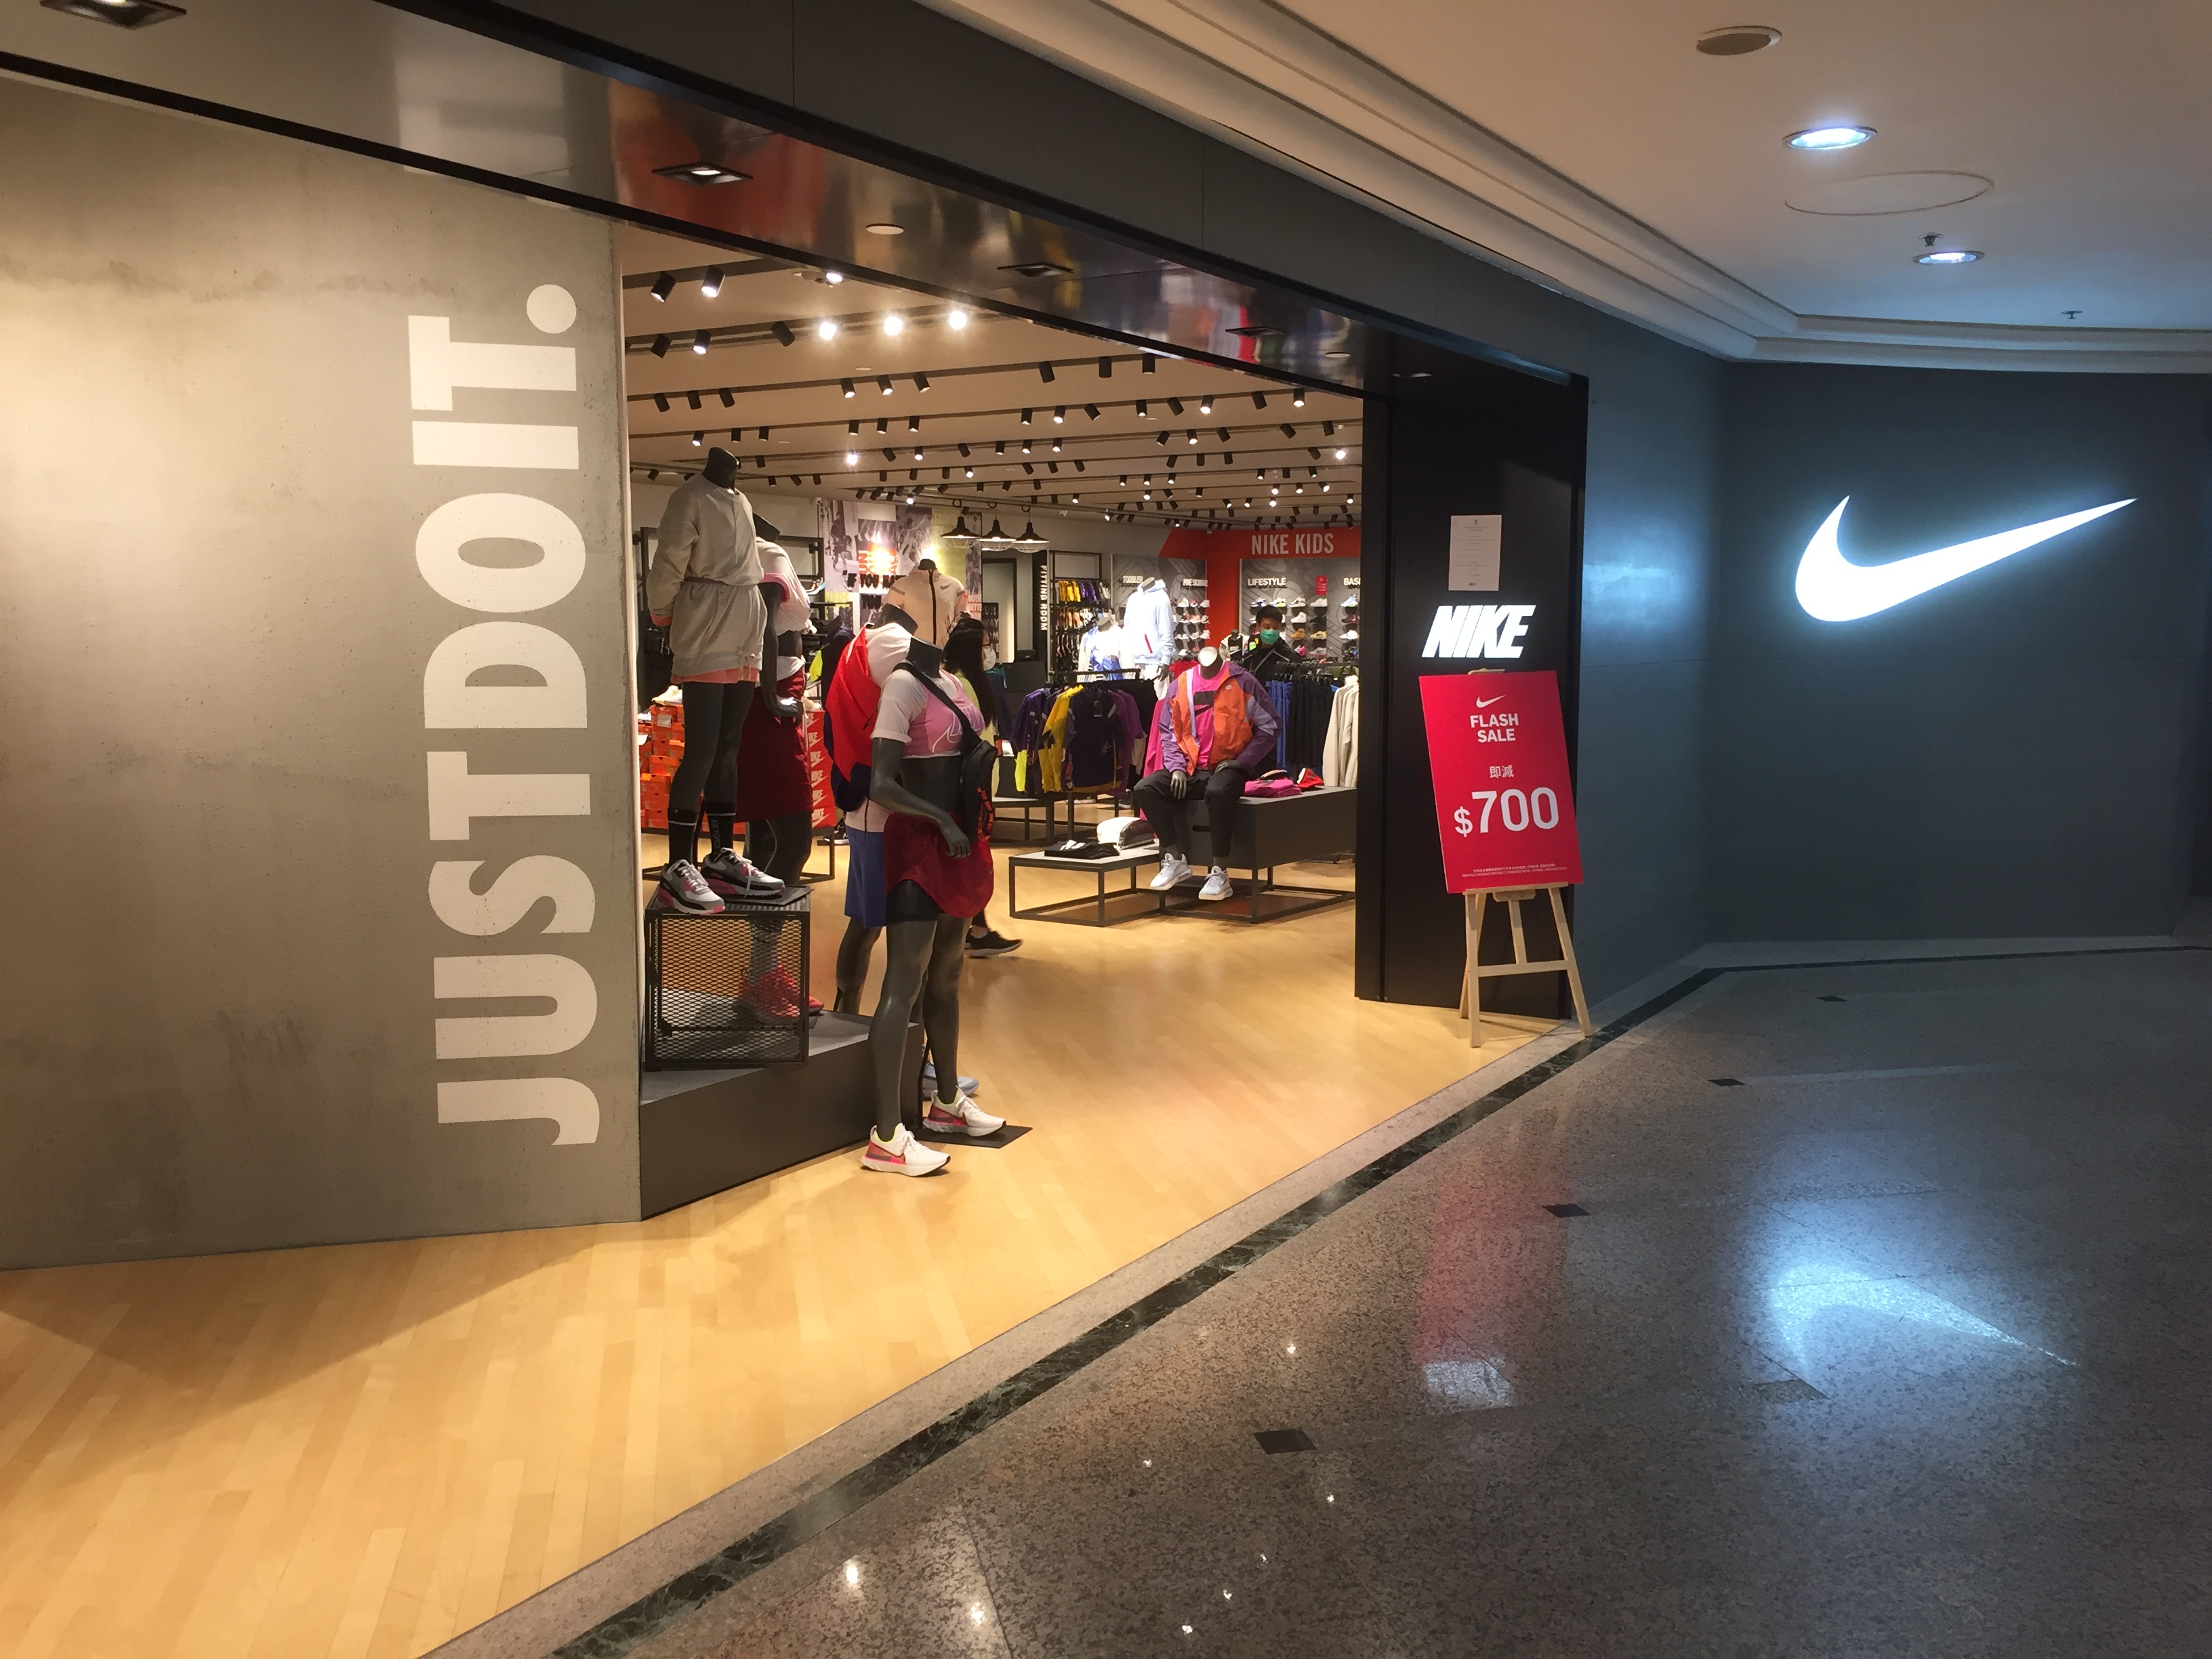 Shopping itineraries in Nike in 2023-06-30T17:00:00-07:00 2023-06-30T17:00:00-07:00) - Trip.com